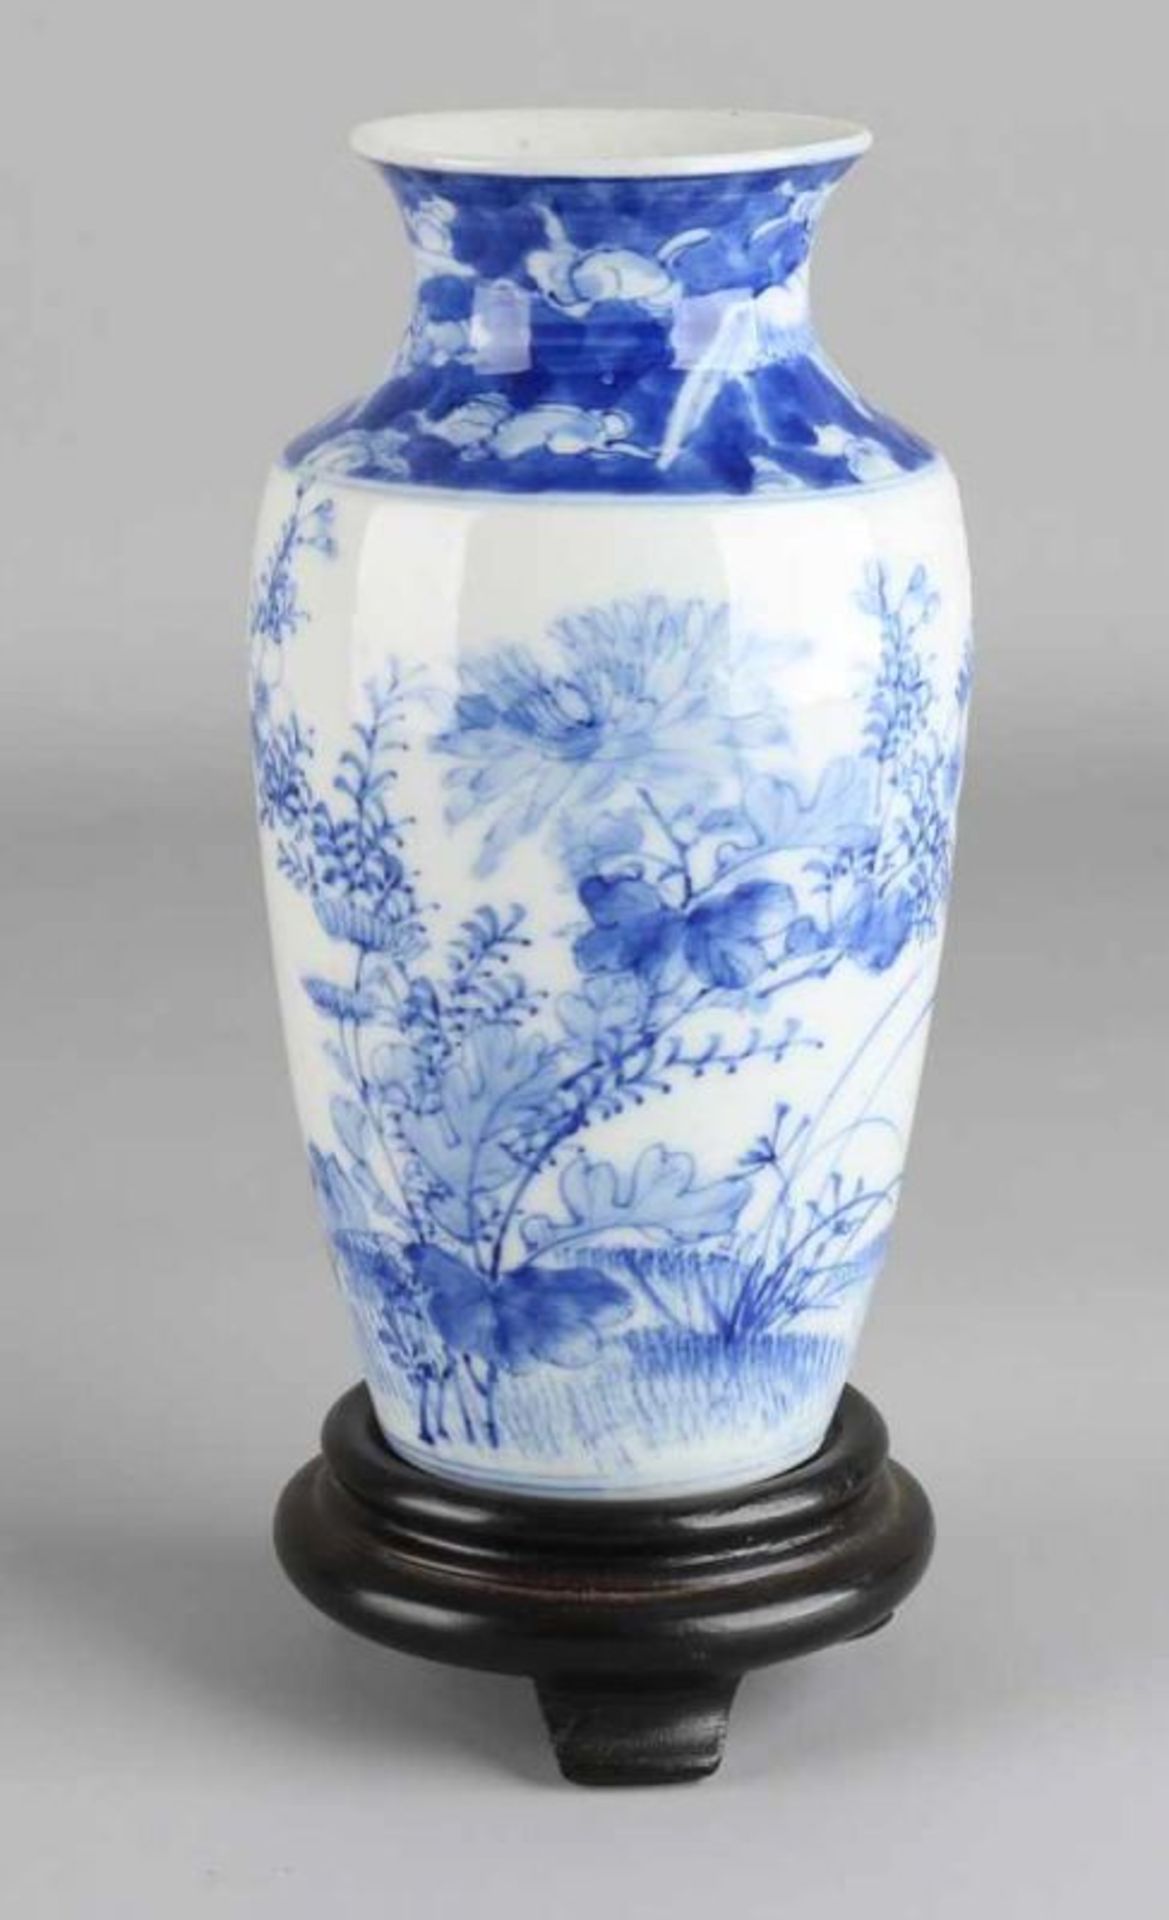 Ancient Chinese porcelain vase with floral decoration. First half 20th century. Size: H 17.5 cm.